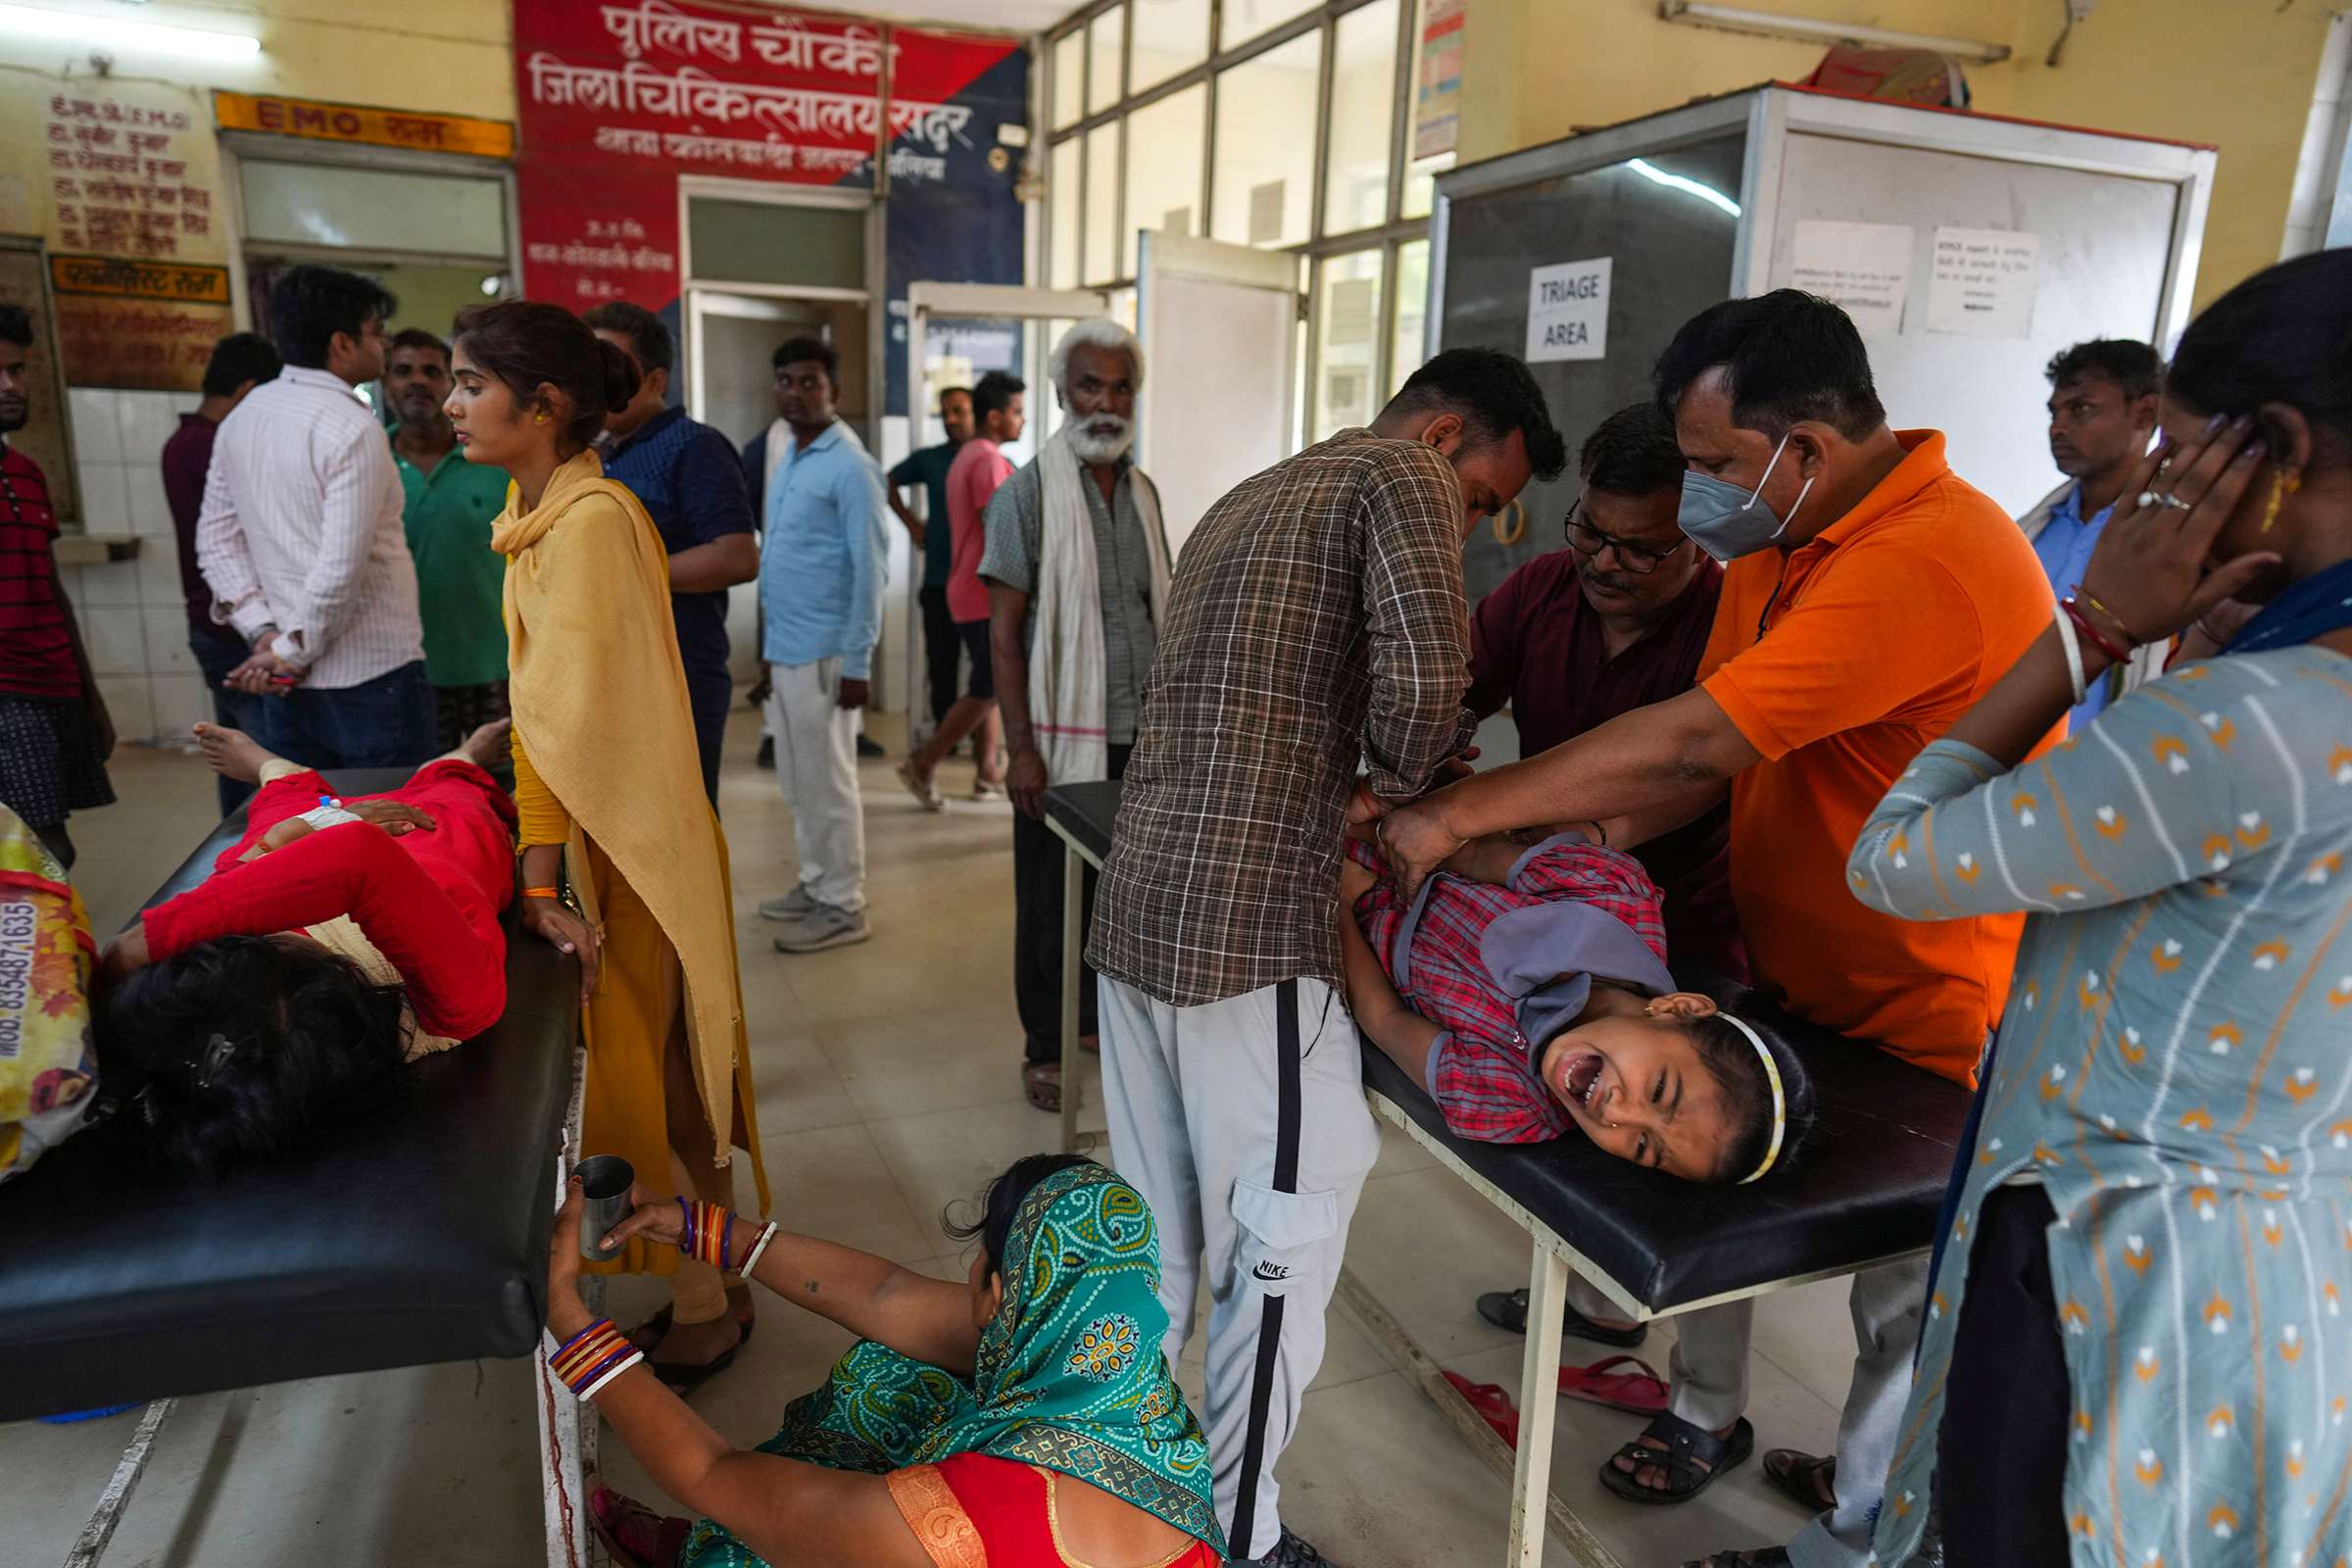 People suffering from heat related ailments crowd the district hospital in Ballia, Uttar Pradesh, India, on June 20. A scorching heat wave in two of India’s most populous states has overwhelmed hospitals, filled a morgue to capacity and disrupted power supply, forcing staff to use books to cool patients as officials investigate the climbing death toll. (Rajesh Kumar Singh—AP)